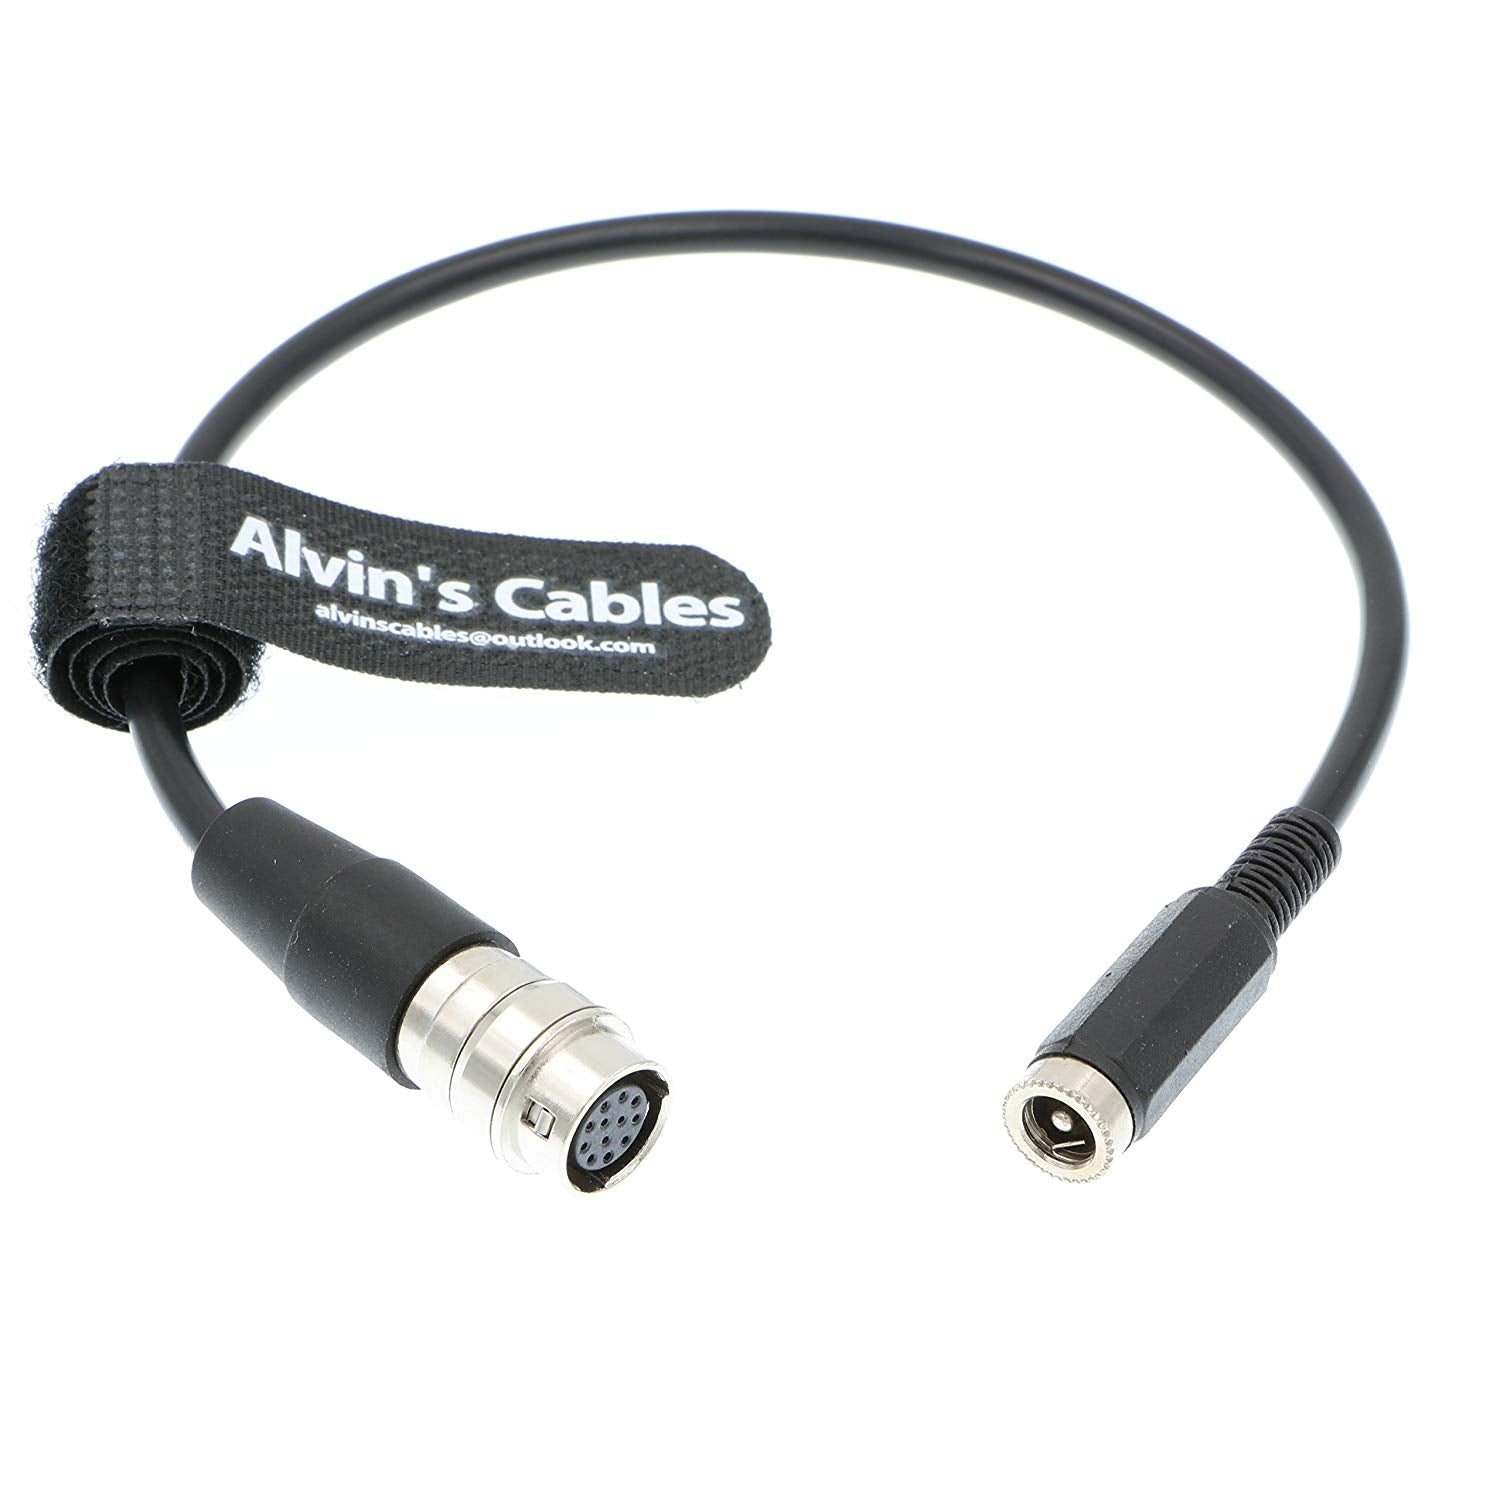 Alvin's Cables 12 Pin Hirose to DC 12v Female Cable for GH4 Power B4 2/3